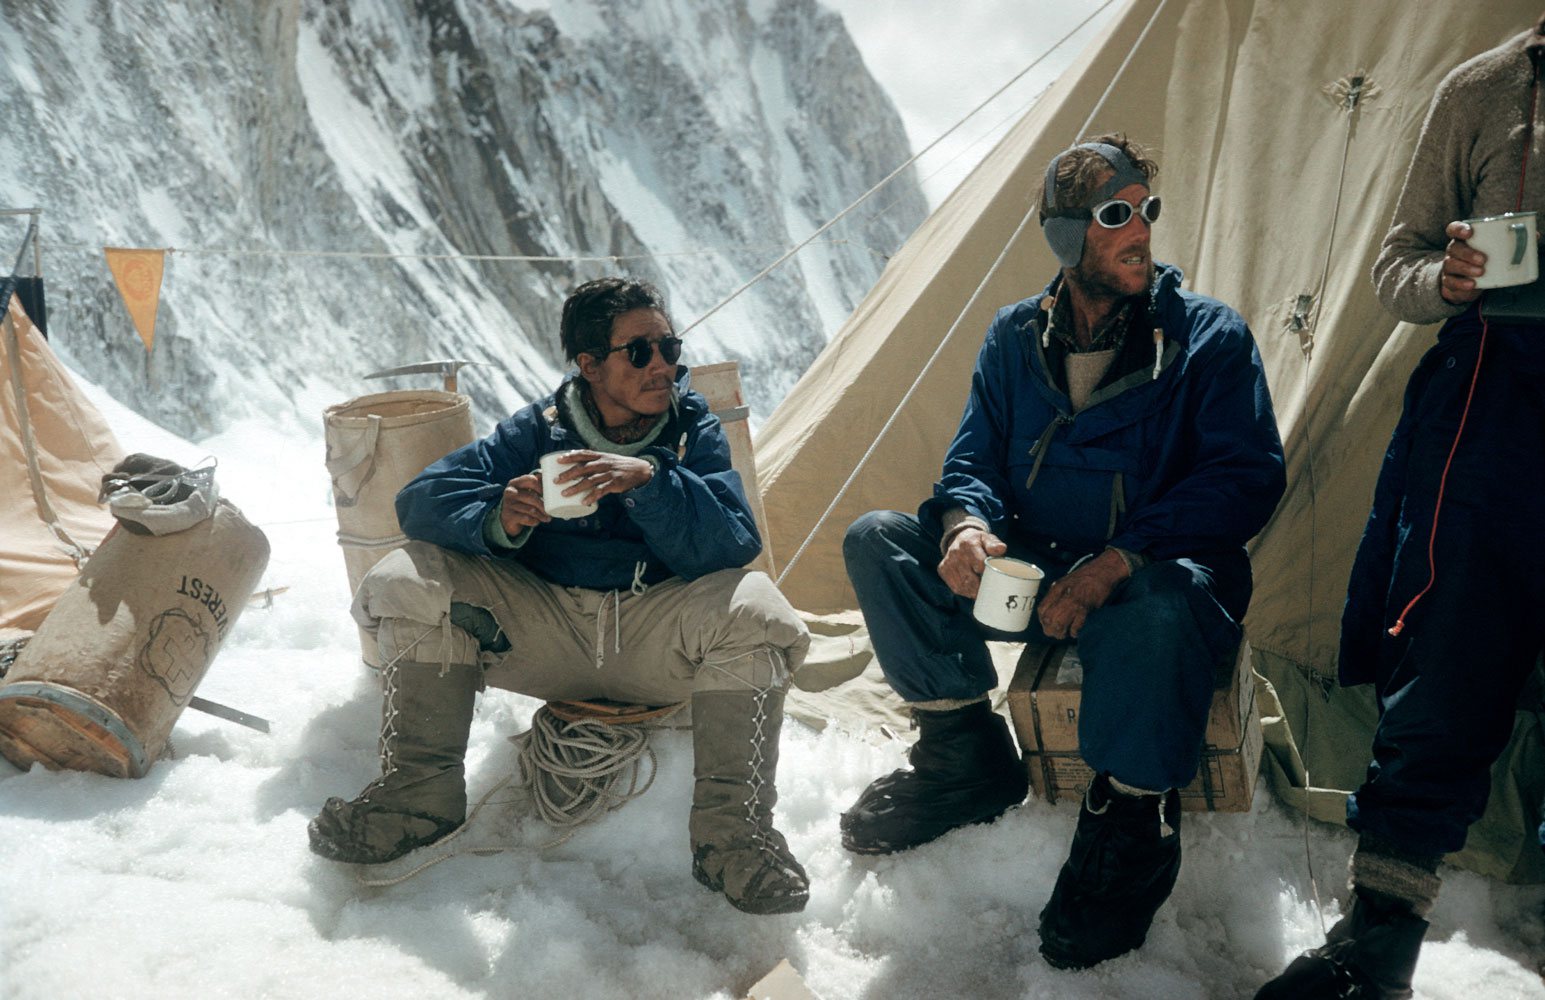 Celebrating their conquest of everest with a cup of tea